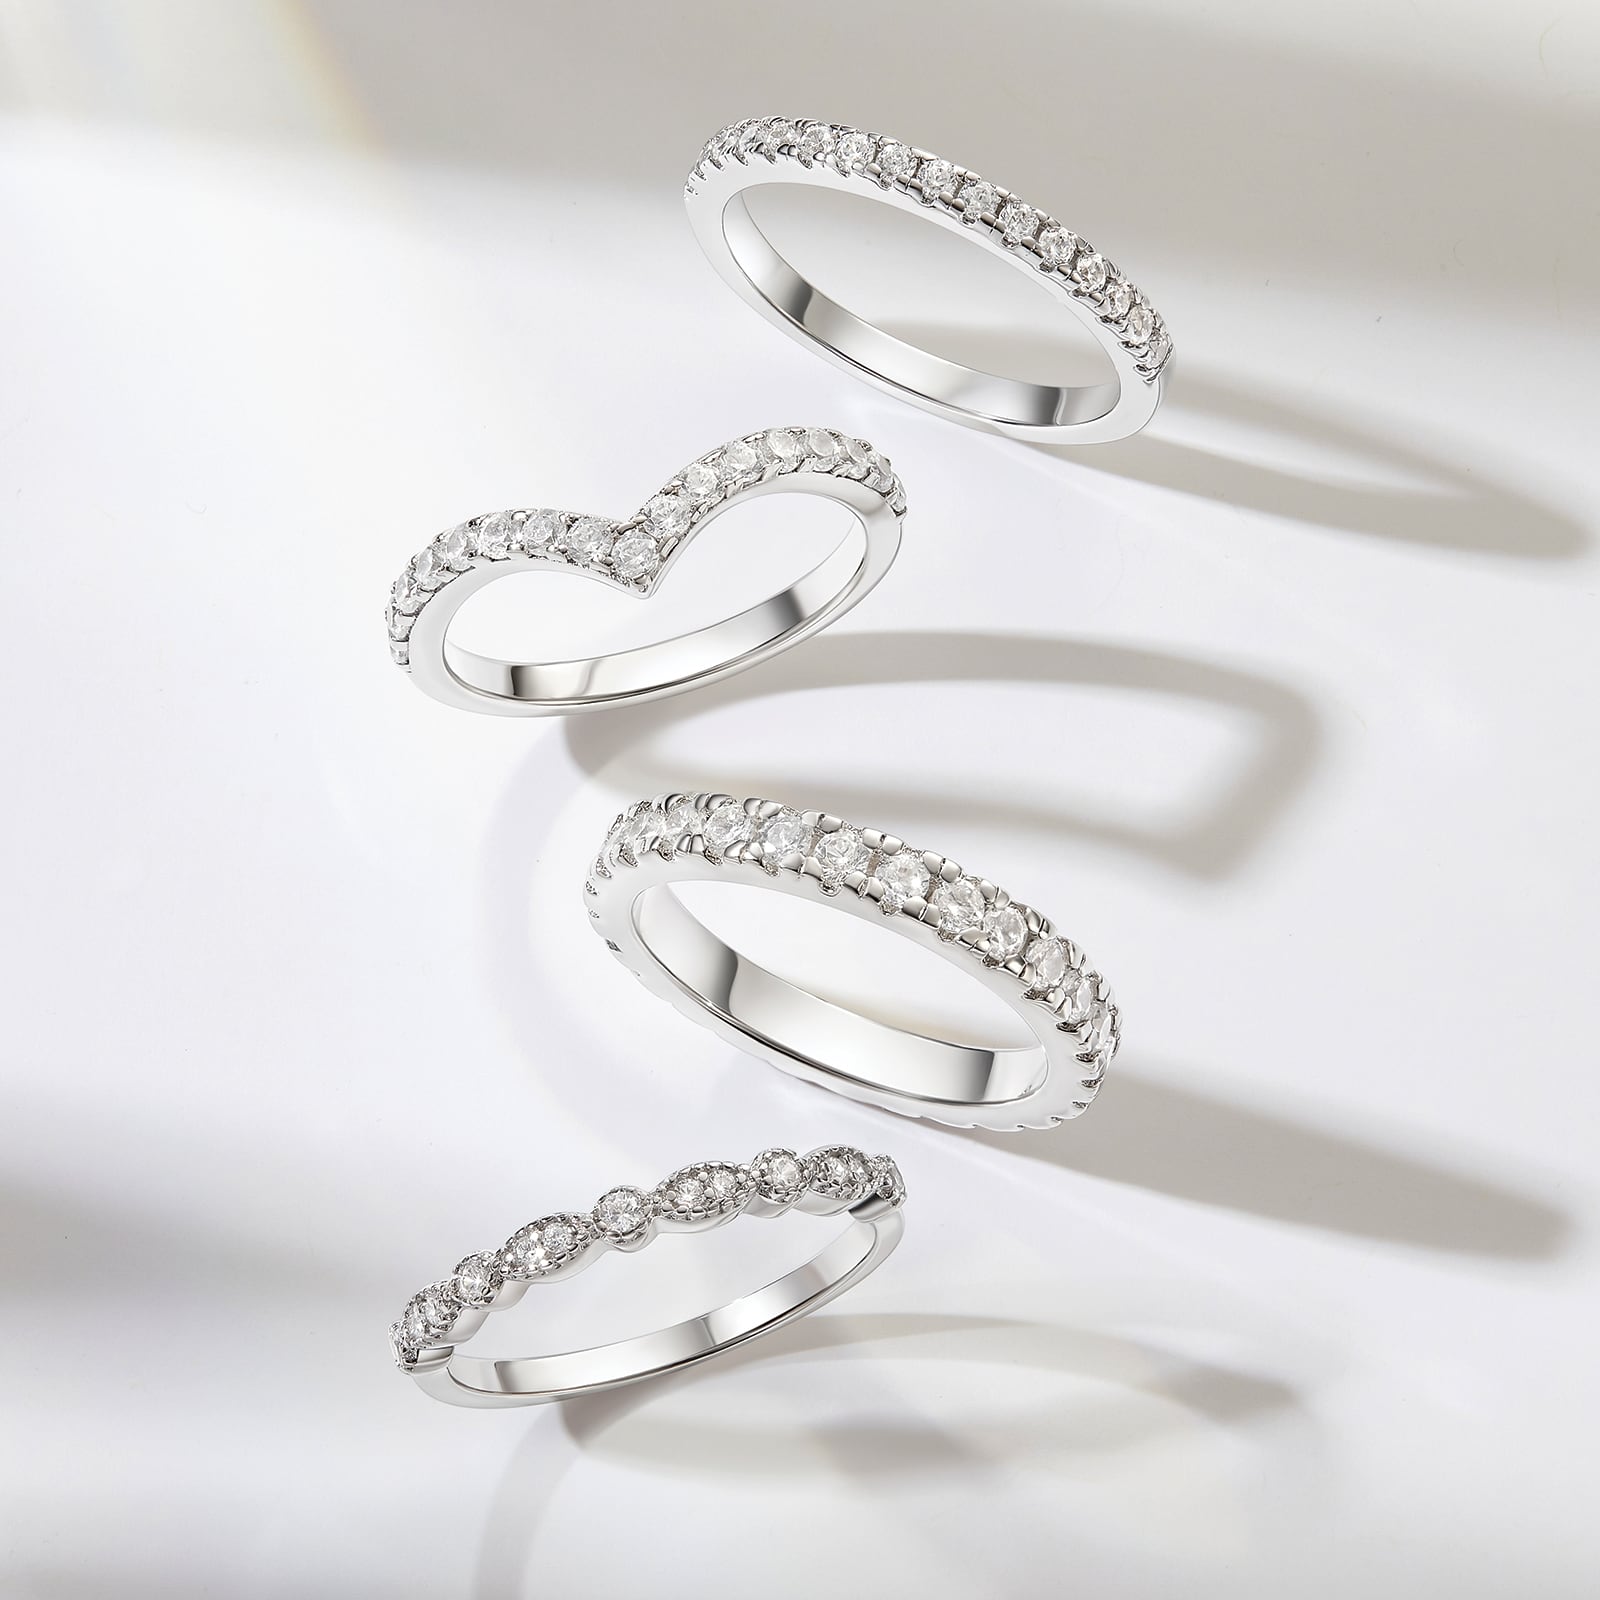 4 affordable silver wedding bands in a row on gray background